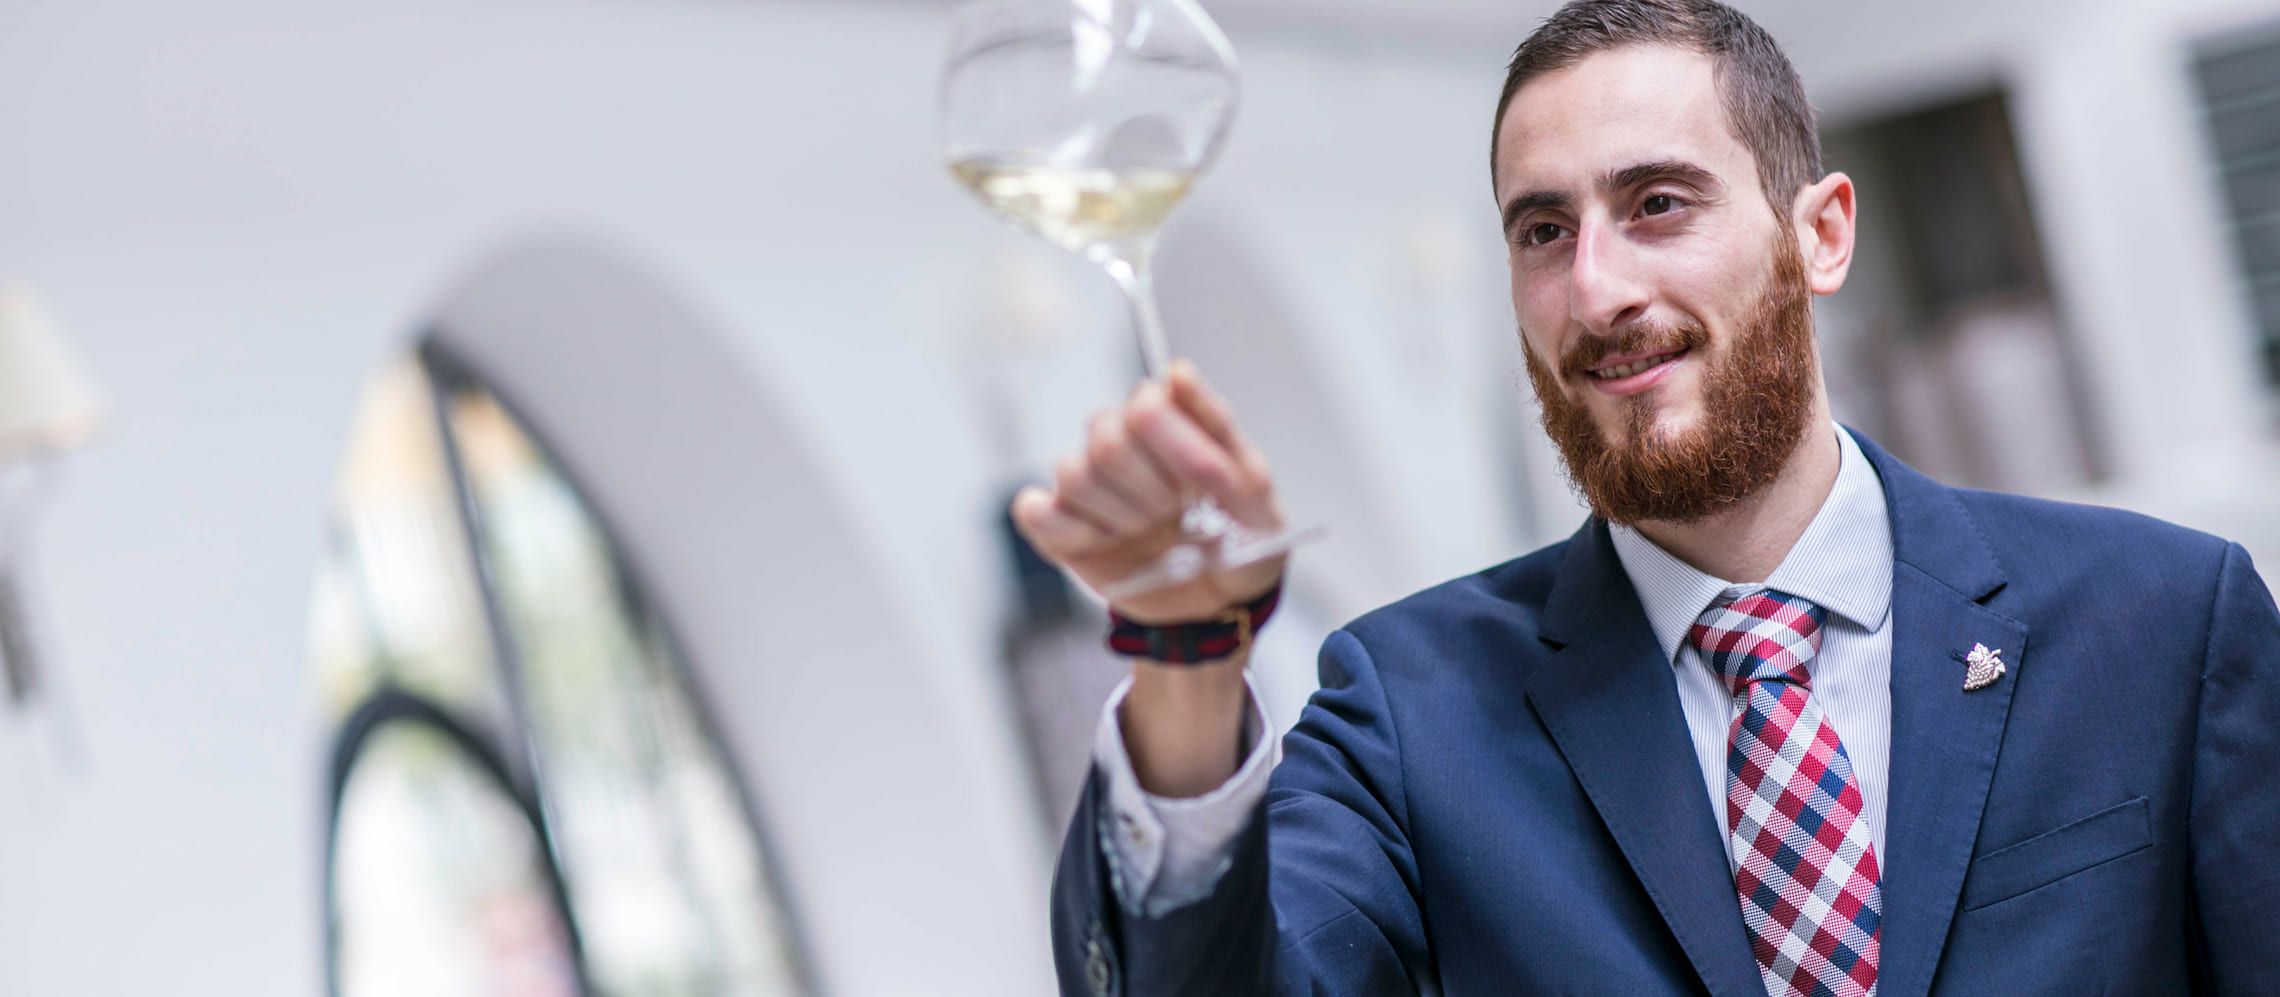 Photo for: Insights from Nicola Perrone, Head Sommelier at The Orrery, London